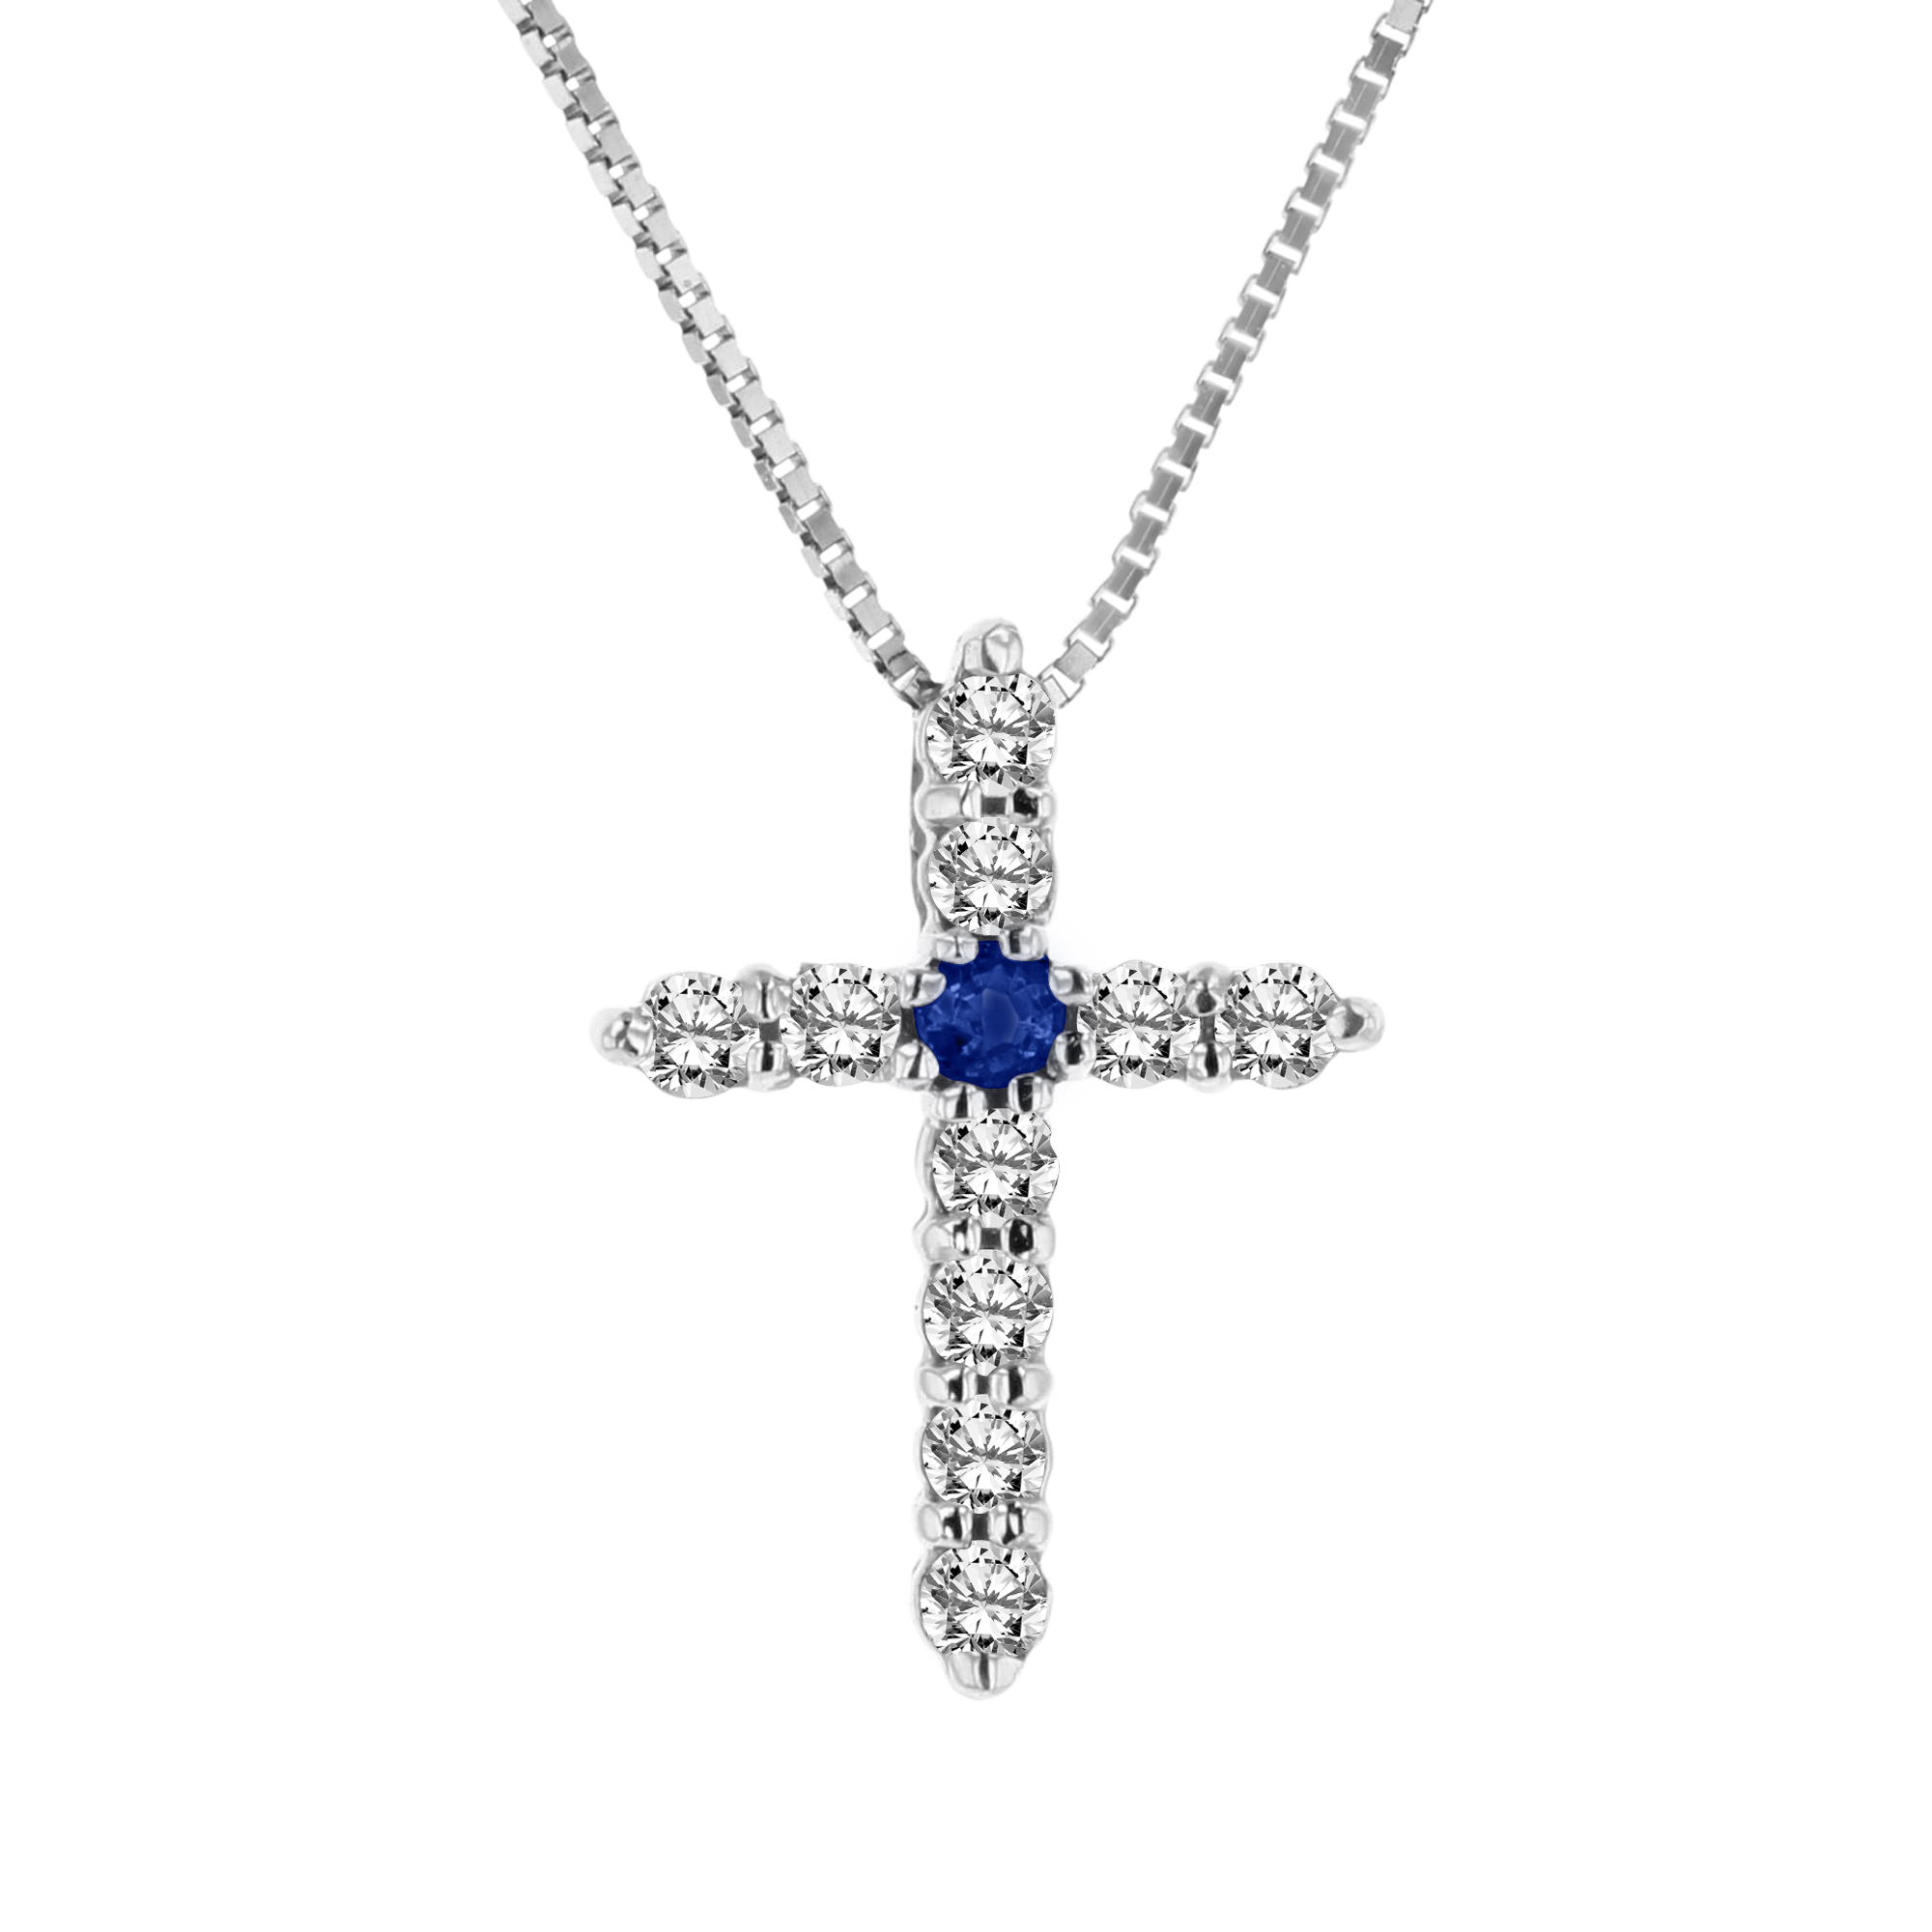 View 0.18ctw Sapphire and Diamond Cross Pendant in 14k White Gold